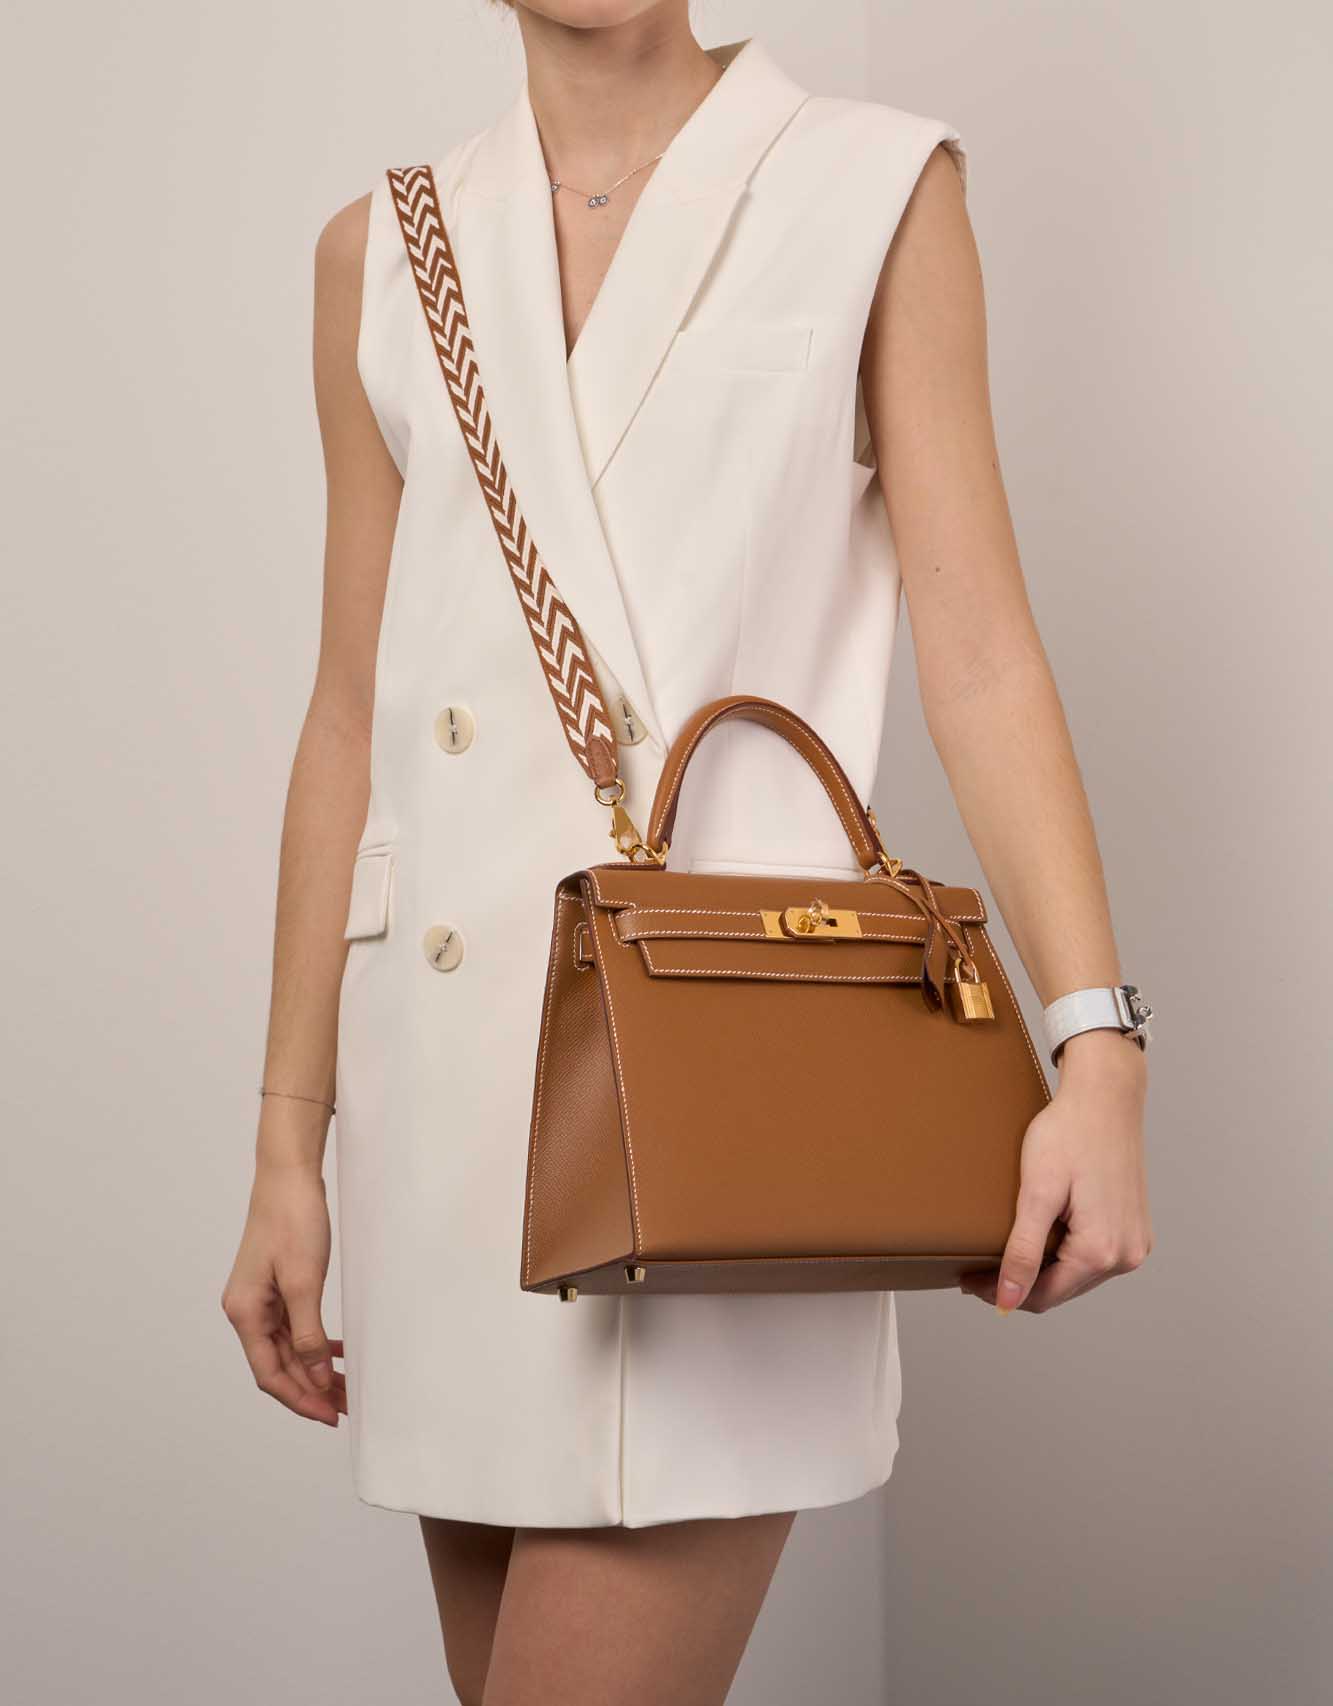 White leather and canvas with gold plated hardware handbag, Kelly